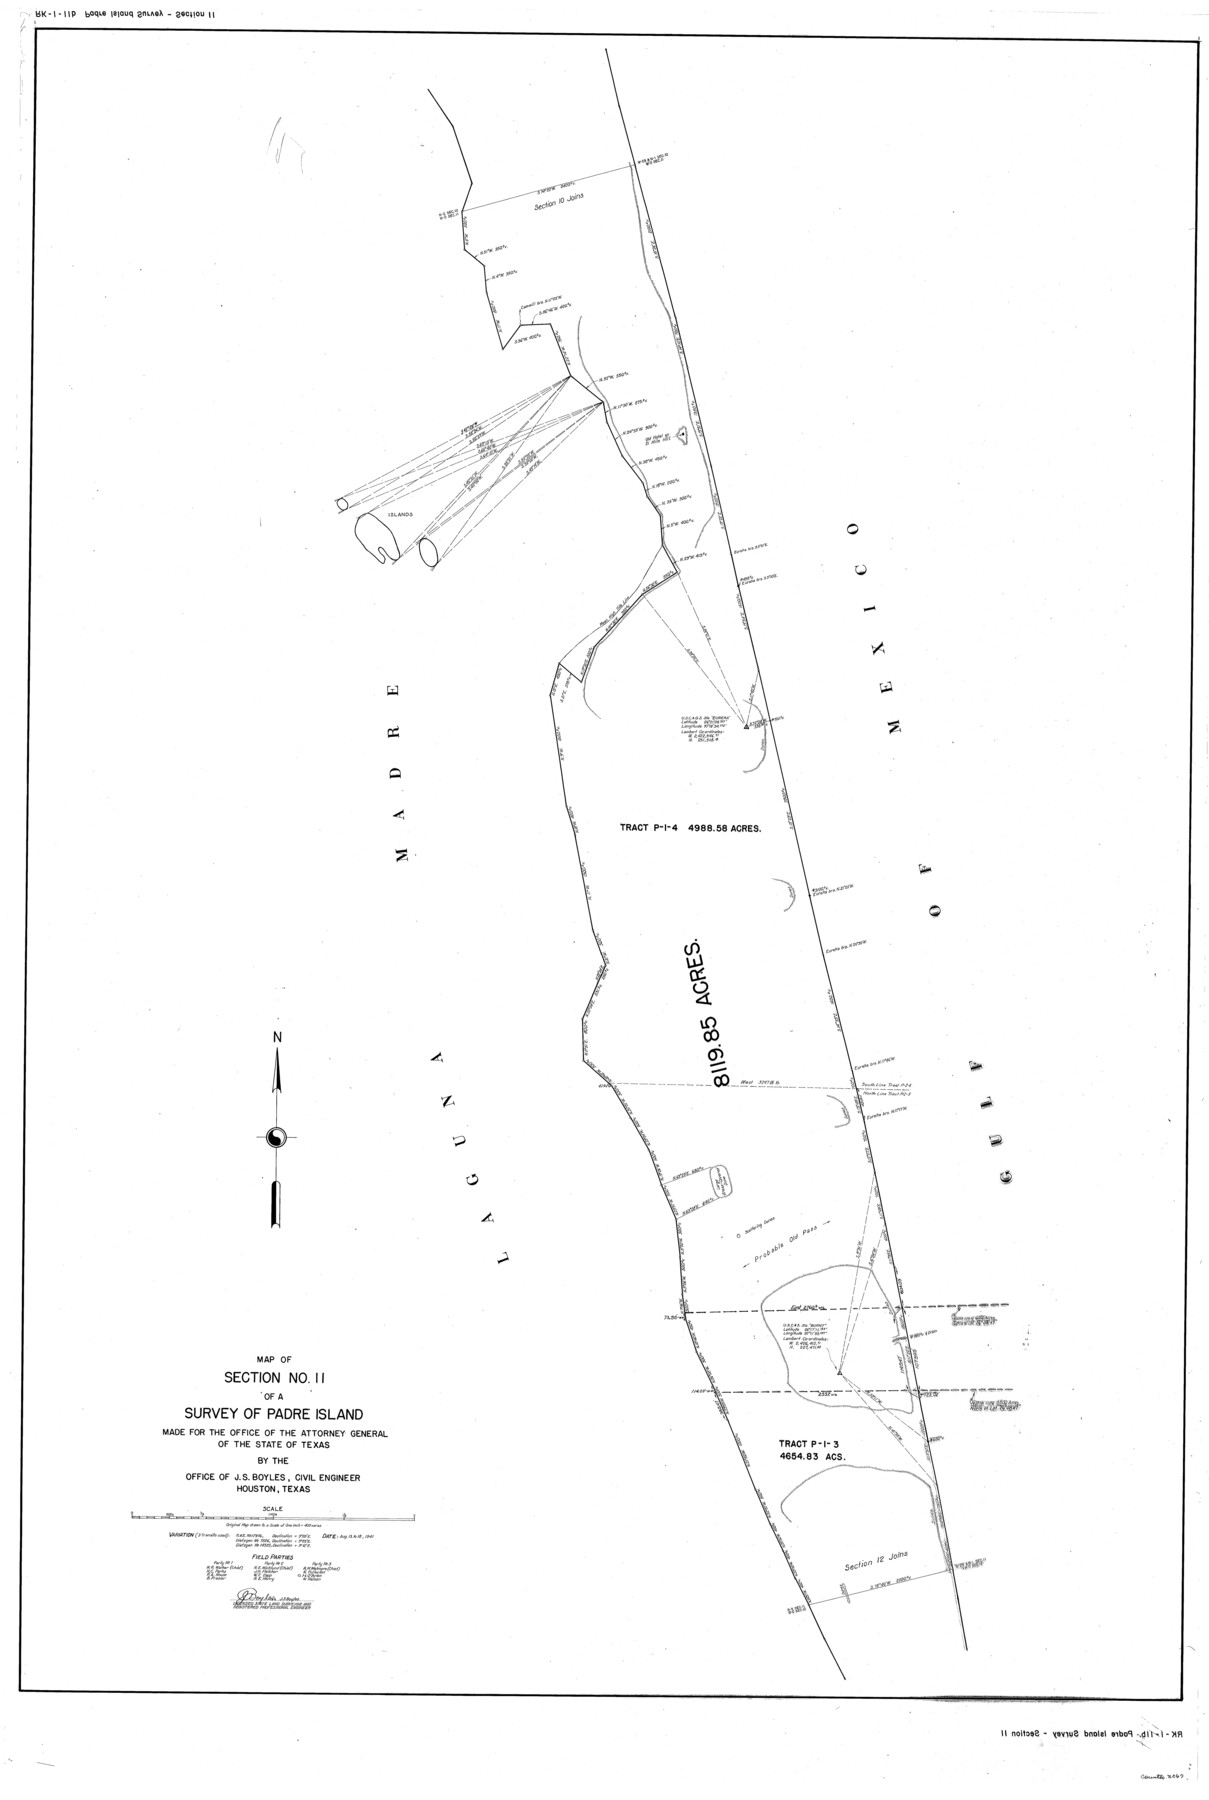 2267, Map of section no. 11 of a survey of Padre Island made for the Office of the Attorney General of the State of Texas, General Map Collection